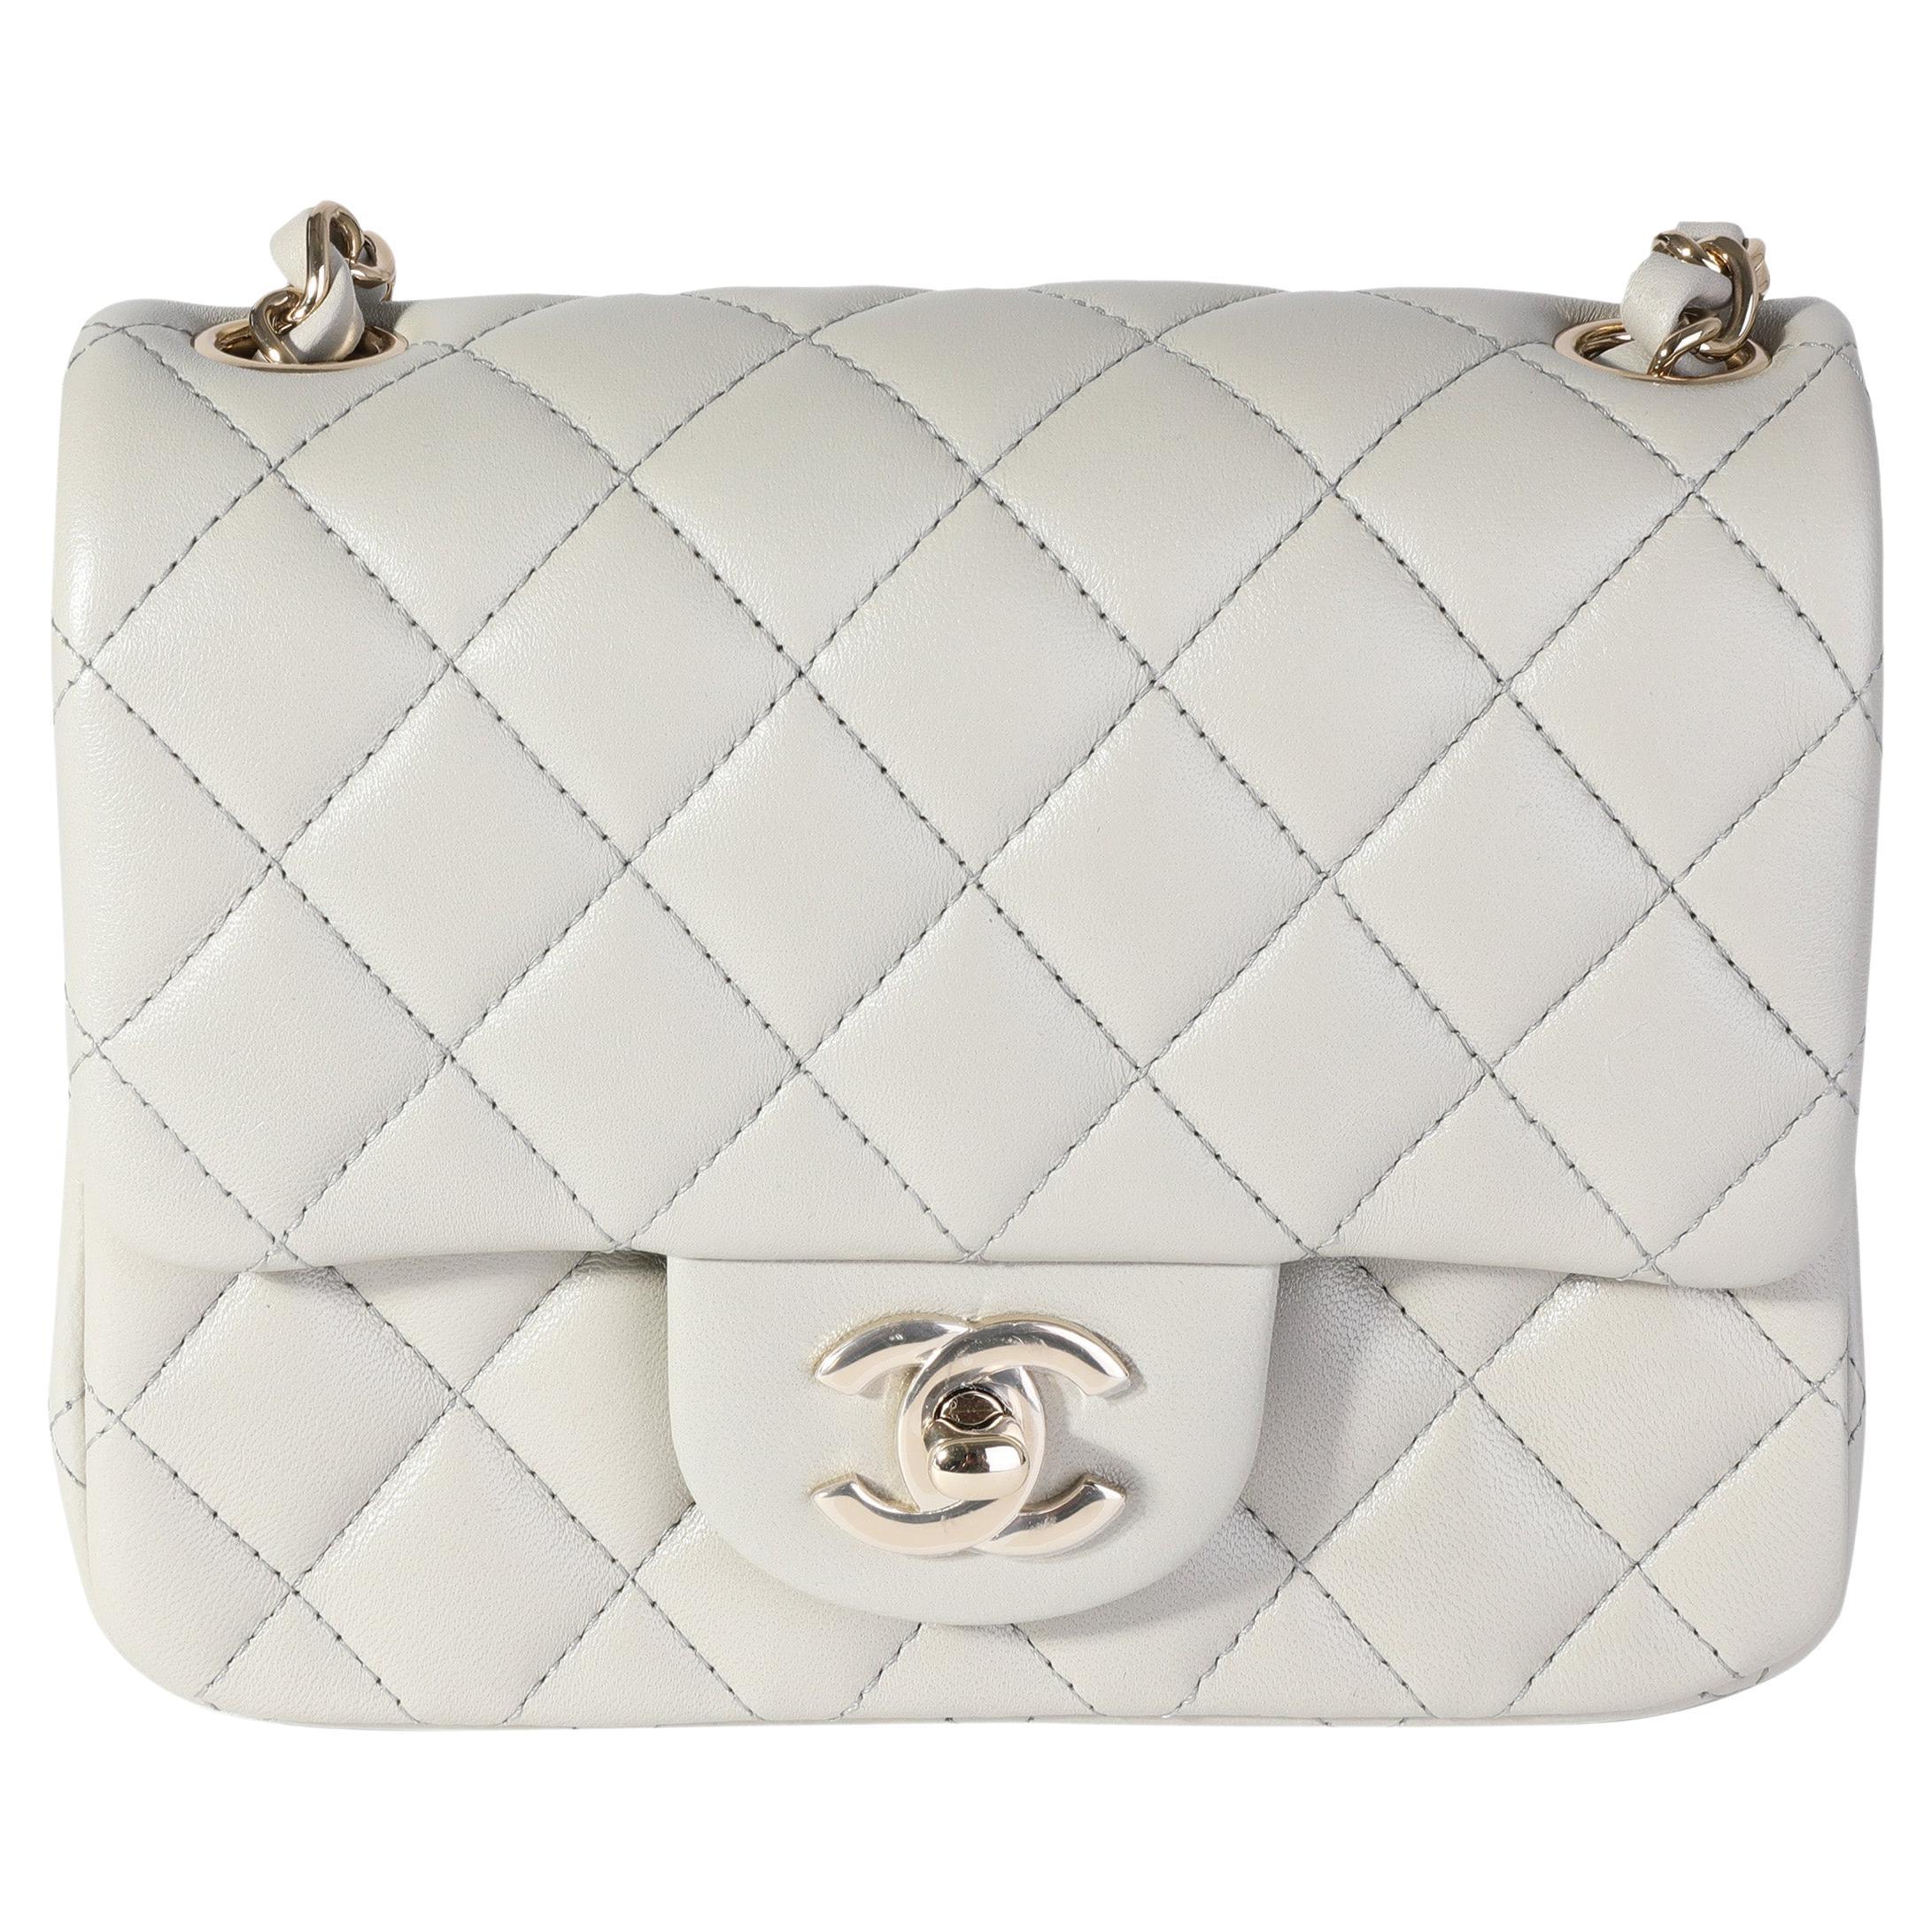 Chanel Light Grey/White Quilted Canvas and Leather Messenger Bag - ShopStyle